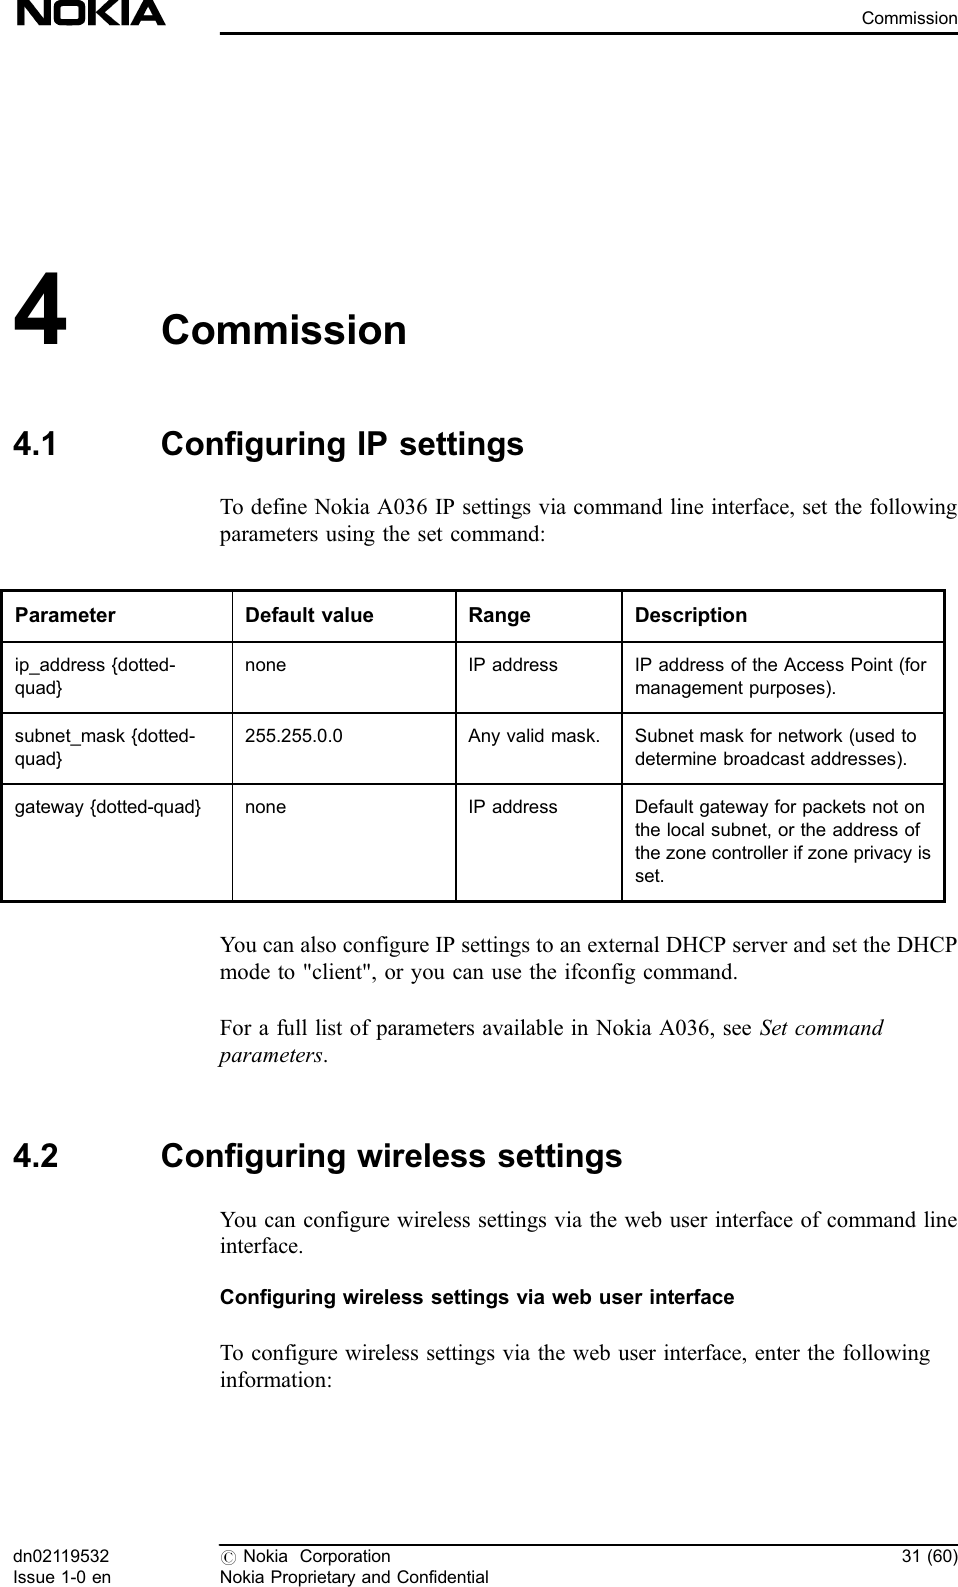 4Commission4.1 Configuring IP settingsTo define Nokia A036 IP settings via command line interface, set the followingparameters using the set command:Parameter Default value Range Descriptionip_address {dotted-quad}none IP address IP address of the Access Point (formanagement purposes).subnet_mask {dotted-quad}255.255.0.0 Any valid mask. Subnet mask for network (used todetermine broadcast addresses).gateway {dotted-quad} none IP address Default gateway for packets not onthe local subnet, or the address ofthe zone controller if zone privacy isset.You can also configure IP settings to an external DHCP server and set the DHCPmode to &quot;client&quot;, or you can use the ifconfig command.For a full list of parameters available in Nokia A036, see Set commandparameters.4.2 Configuring wireless settingsYou can configure wireless settings via the web user interface of command lineinterface.Configuring wireless settings via web user interfaceTo configure wireless settings via the web user interface, enter the followinginformation:dn02119532Issue 1-0 en#Nokia CorporationNokia Proprietary and Confidential31 (60)Commission